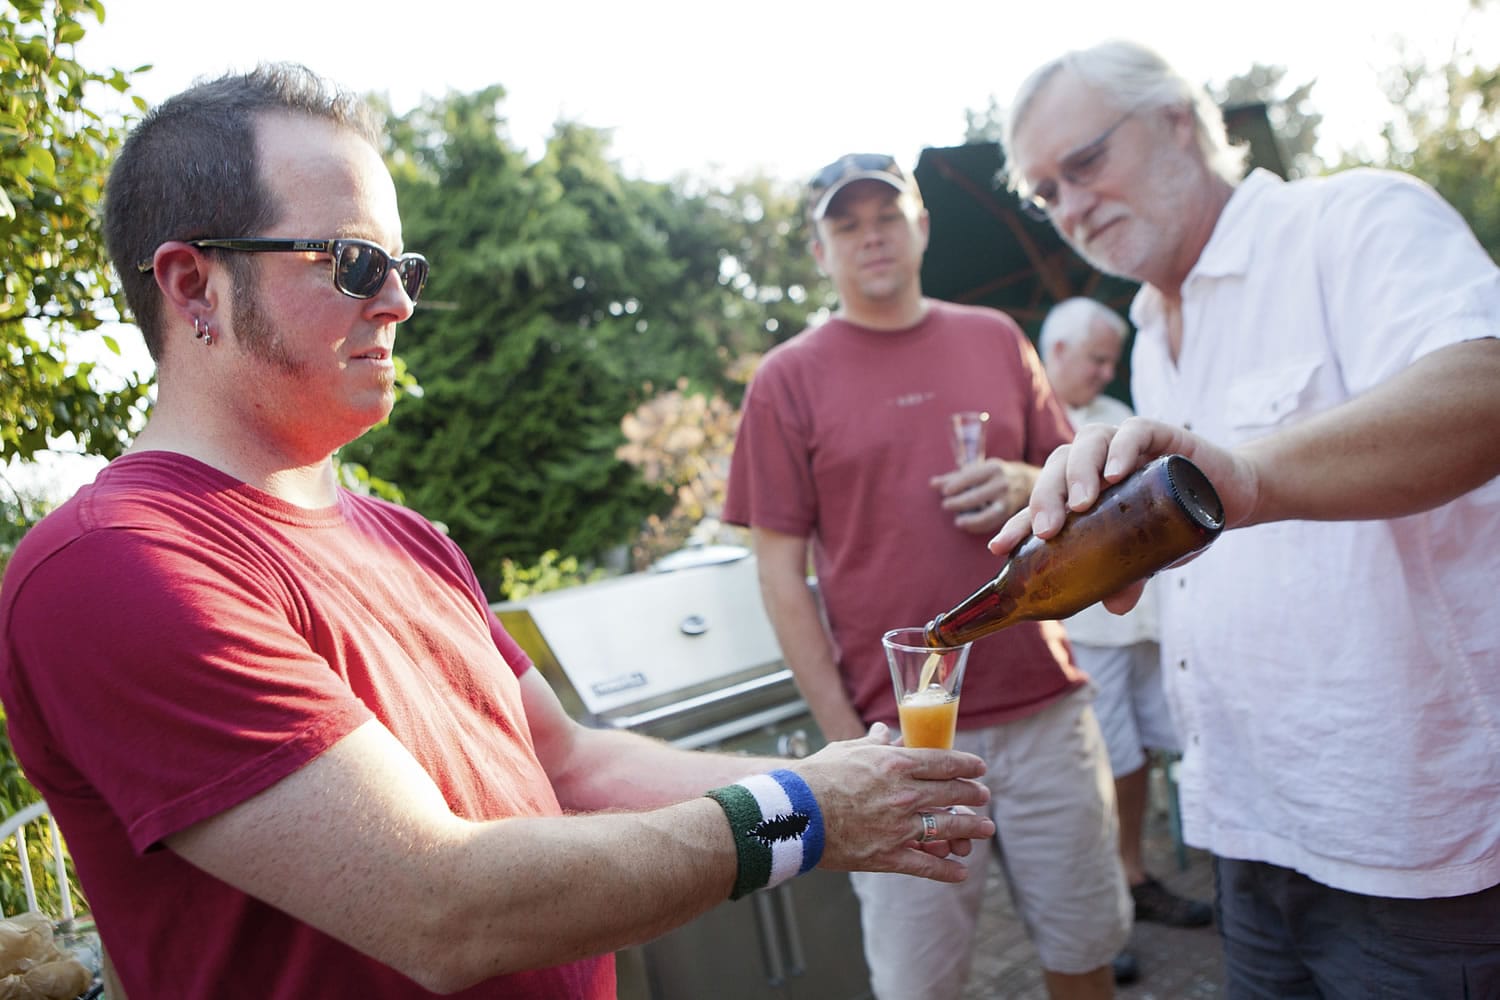 Carter Park resident Gary Kokstis pours a glass of home-brewed beer for neighbor Jerrad Isch during a gathering of the informal 29th Street Brewers Guild in Kokstis' backyard garden.